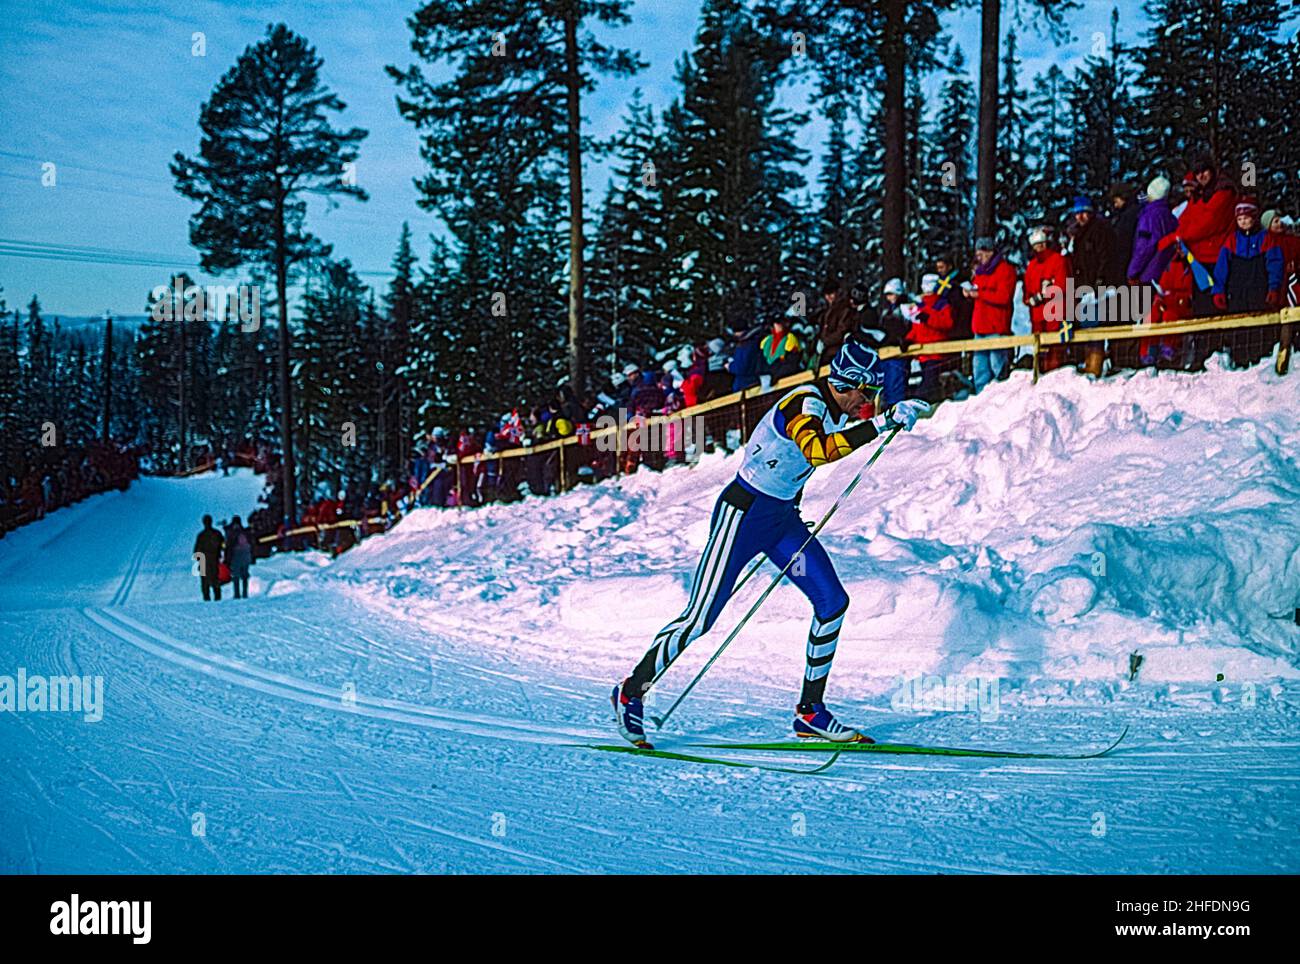 Mikhail Botvinov (RUS) competing in the men's 10km cross country skiing at the 1994 Olympic Winter Games. Stock Photo